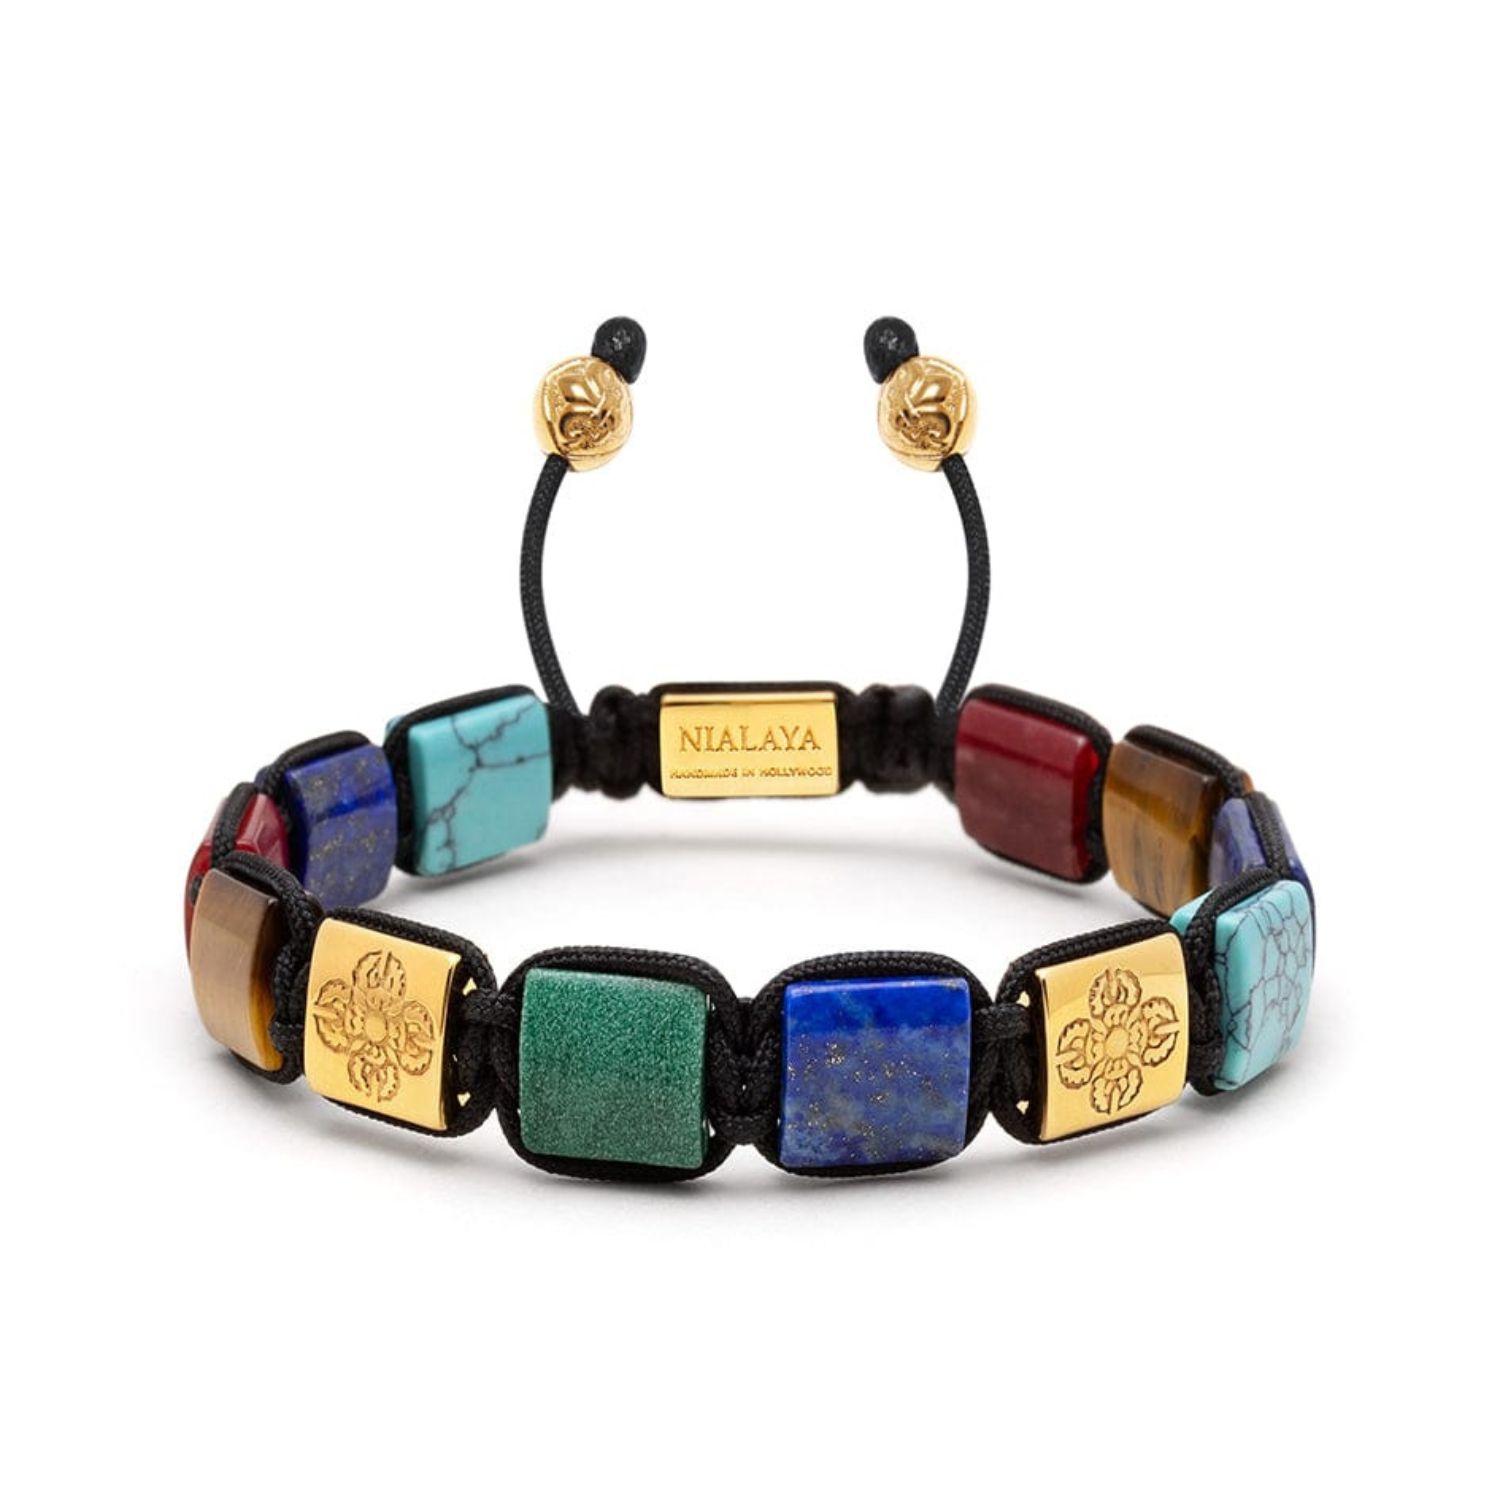 Nialaya Men's The Dorje Flatbead Collection - Blue Lapis, Green Jade, Brown Tiger Eye, Red Jade And Turquois In Multi